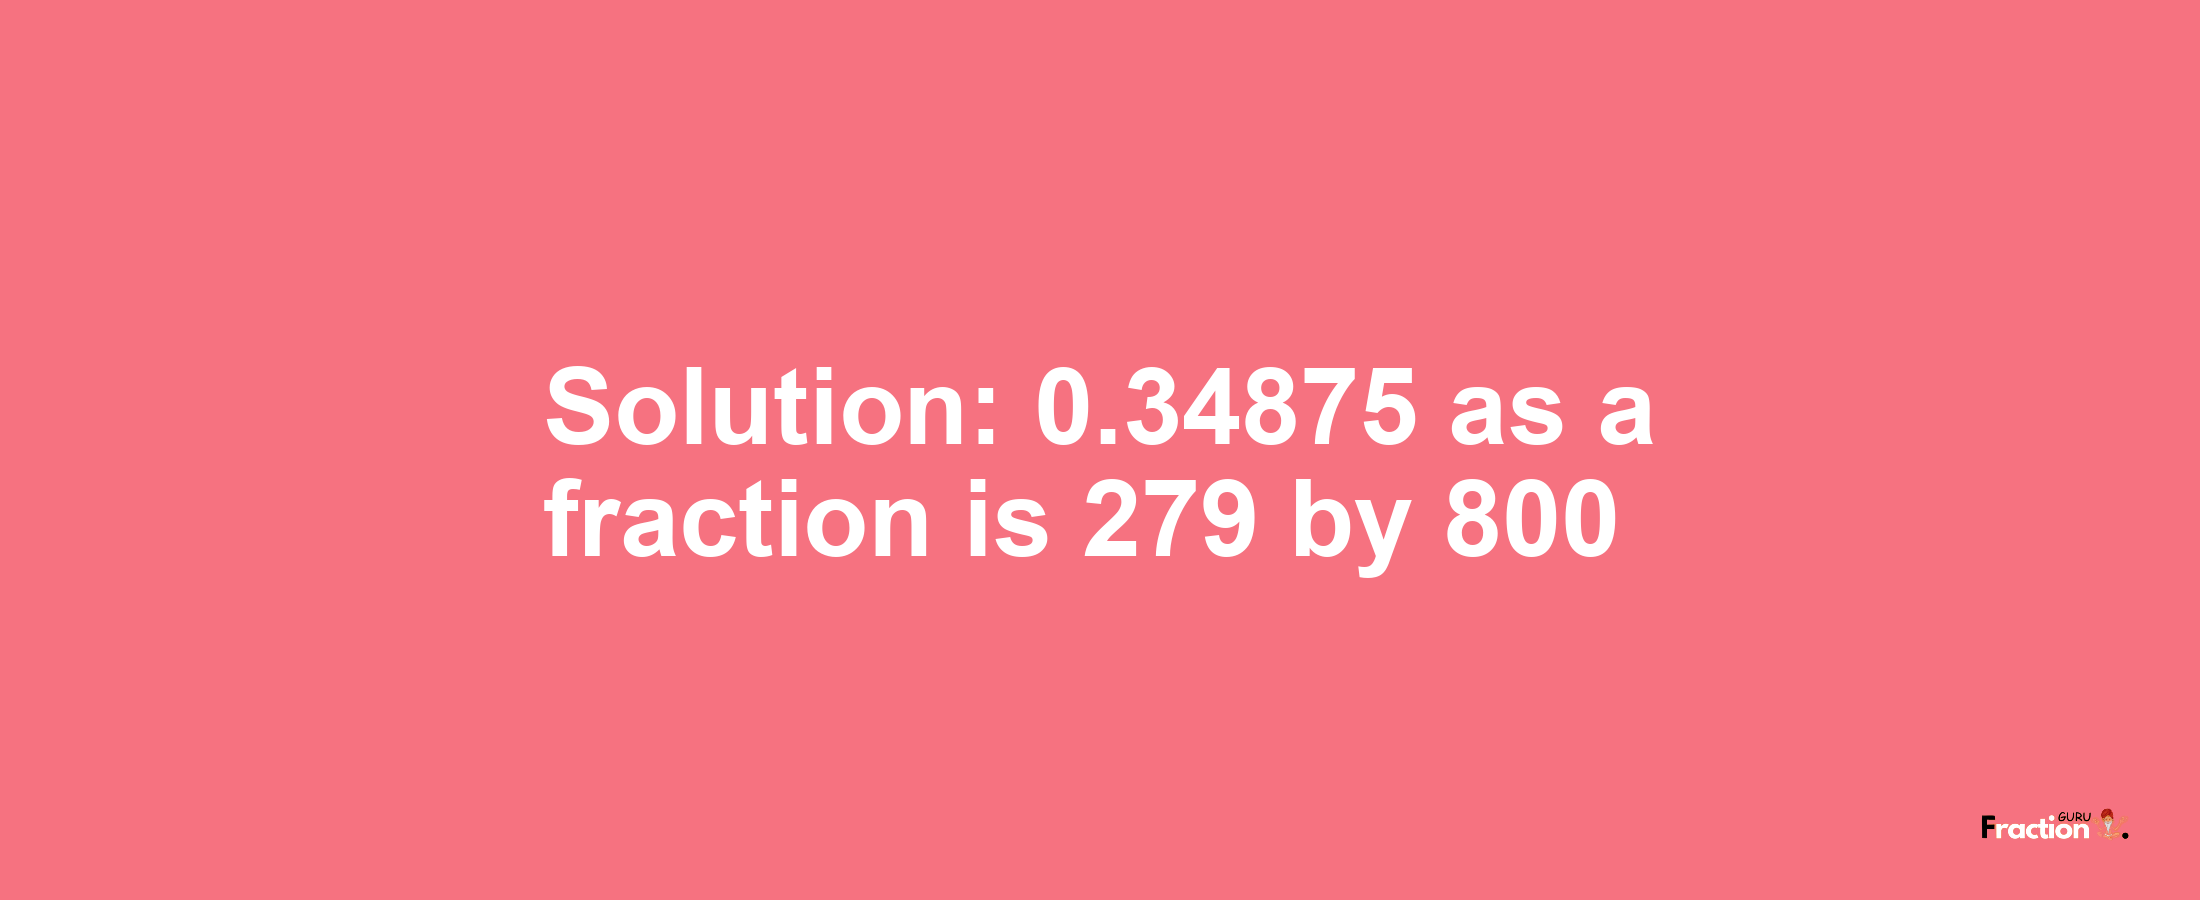 Solution:0.34875 as a fraction is 279/800